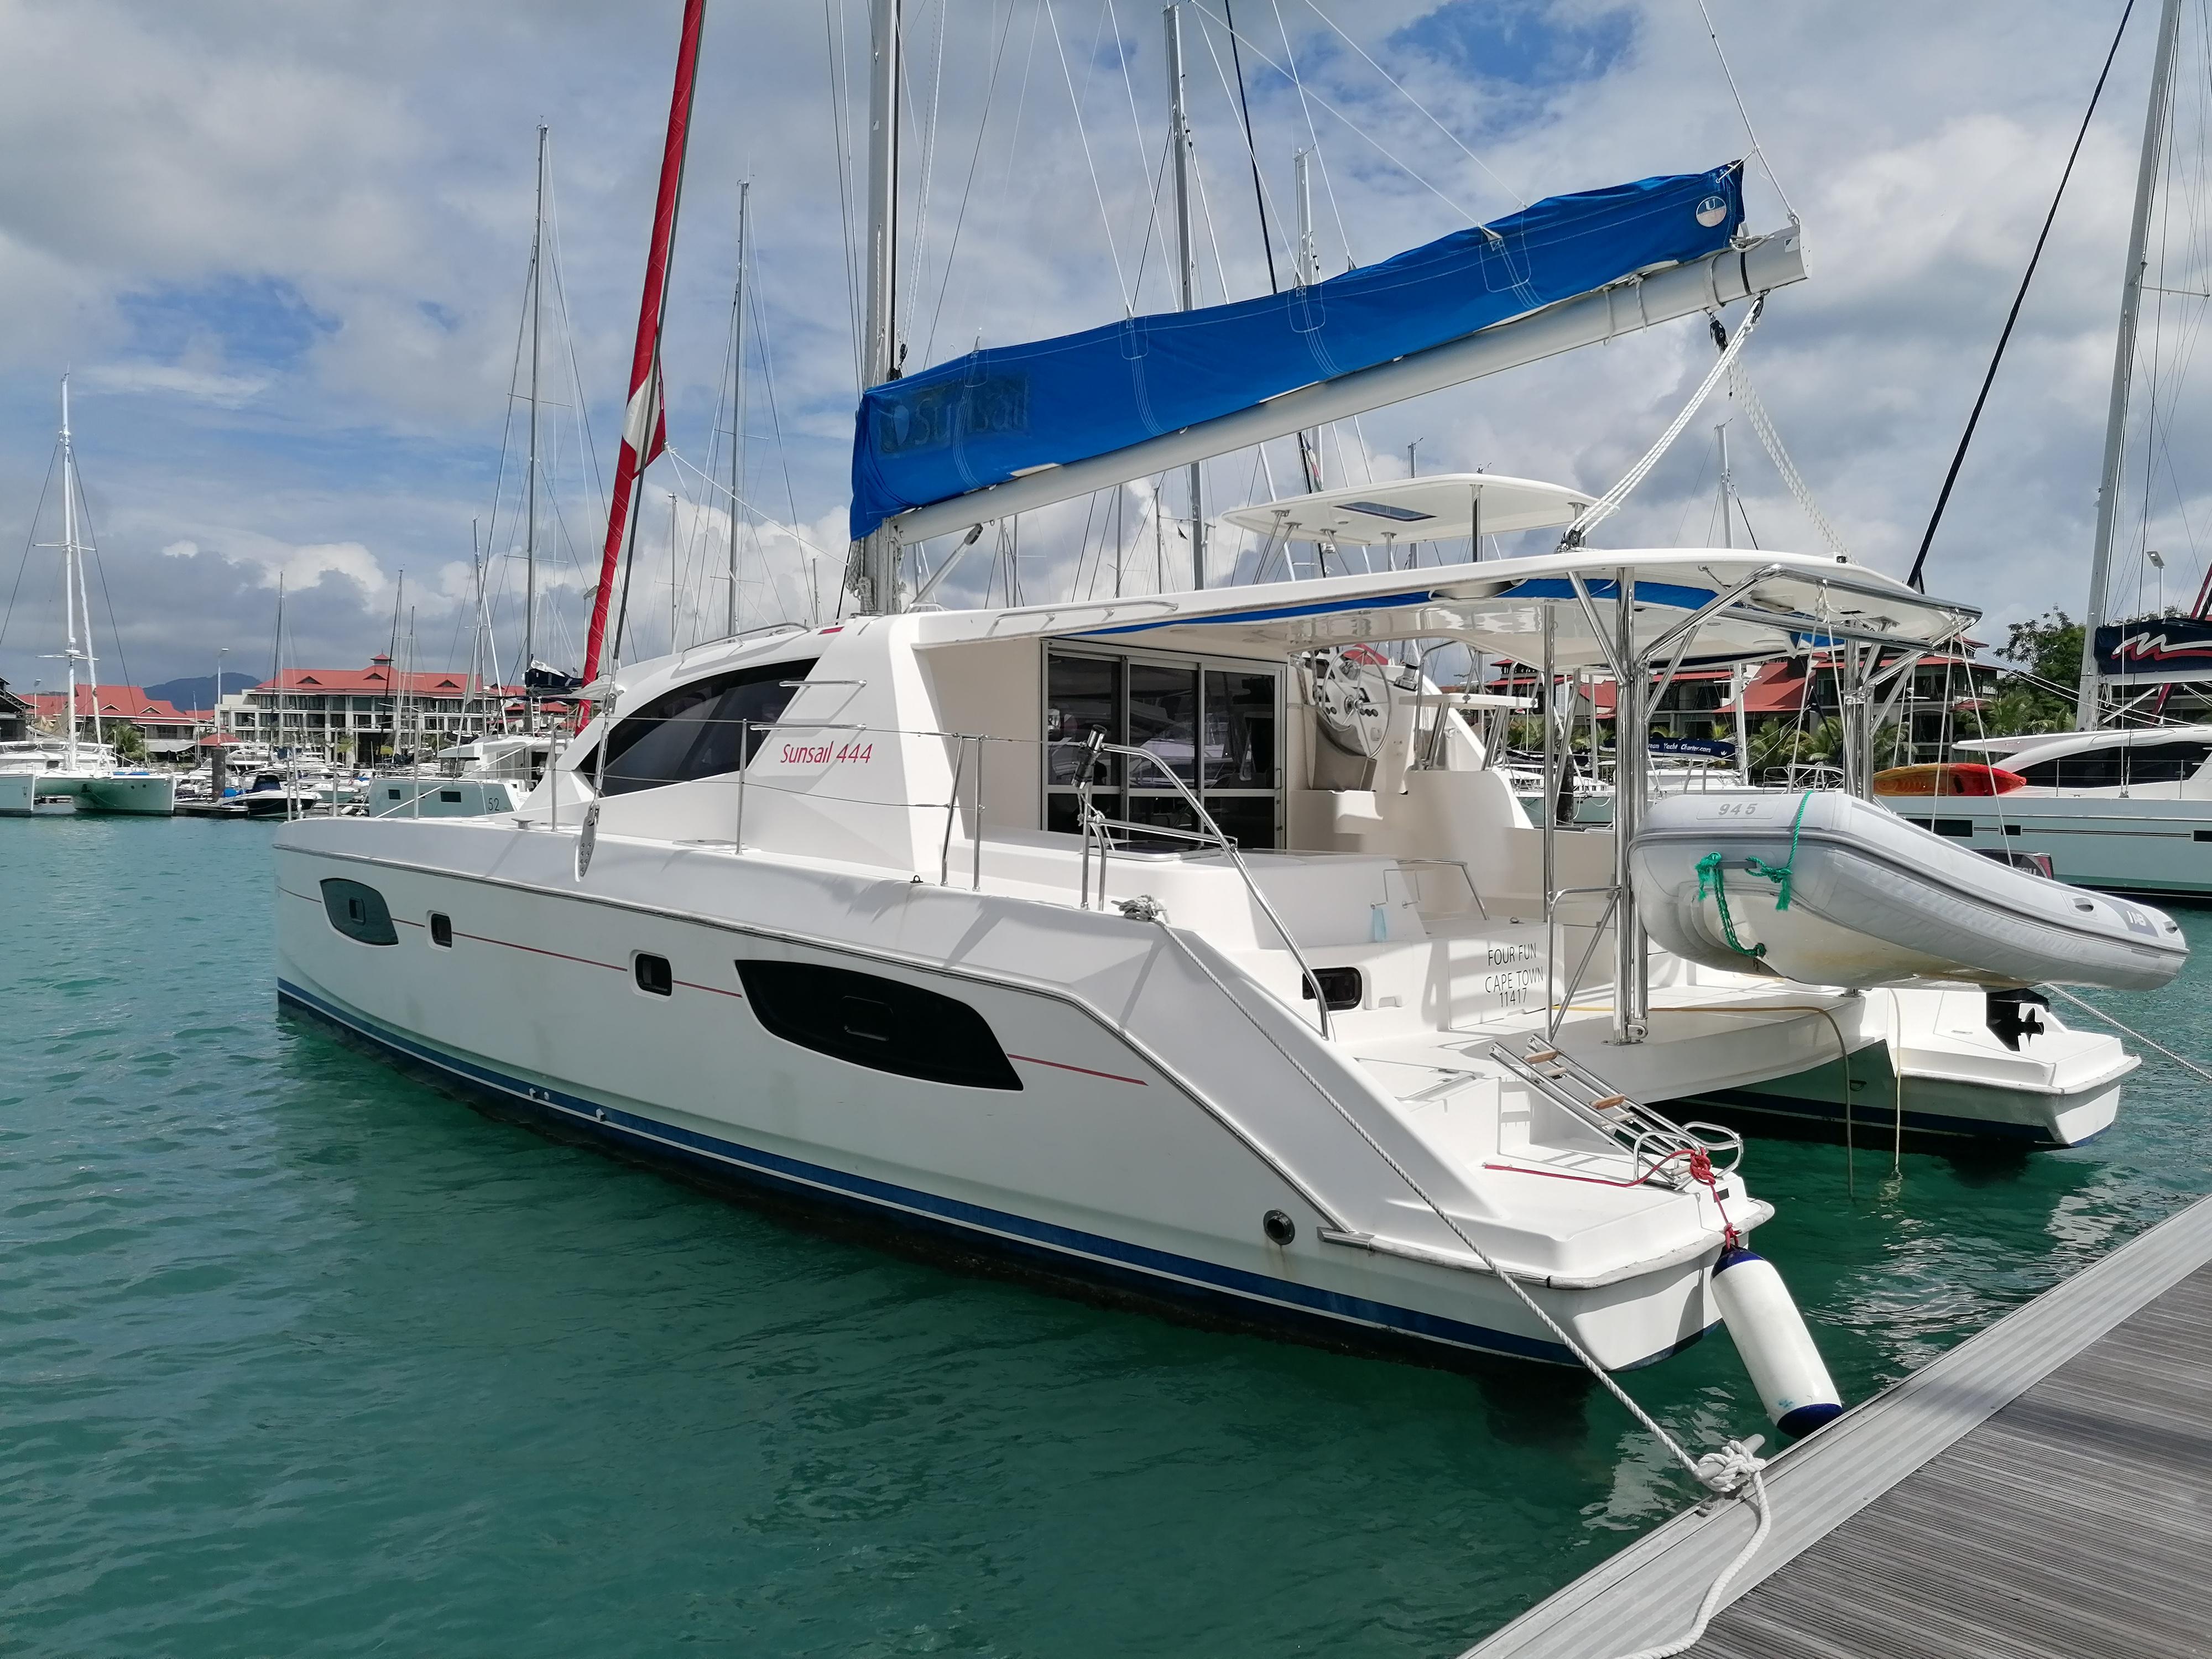 sunsail brokerage yachts for sale